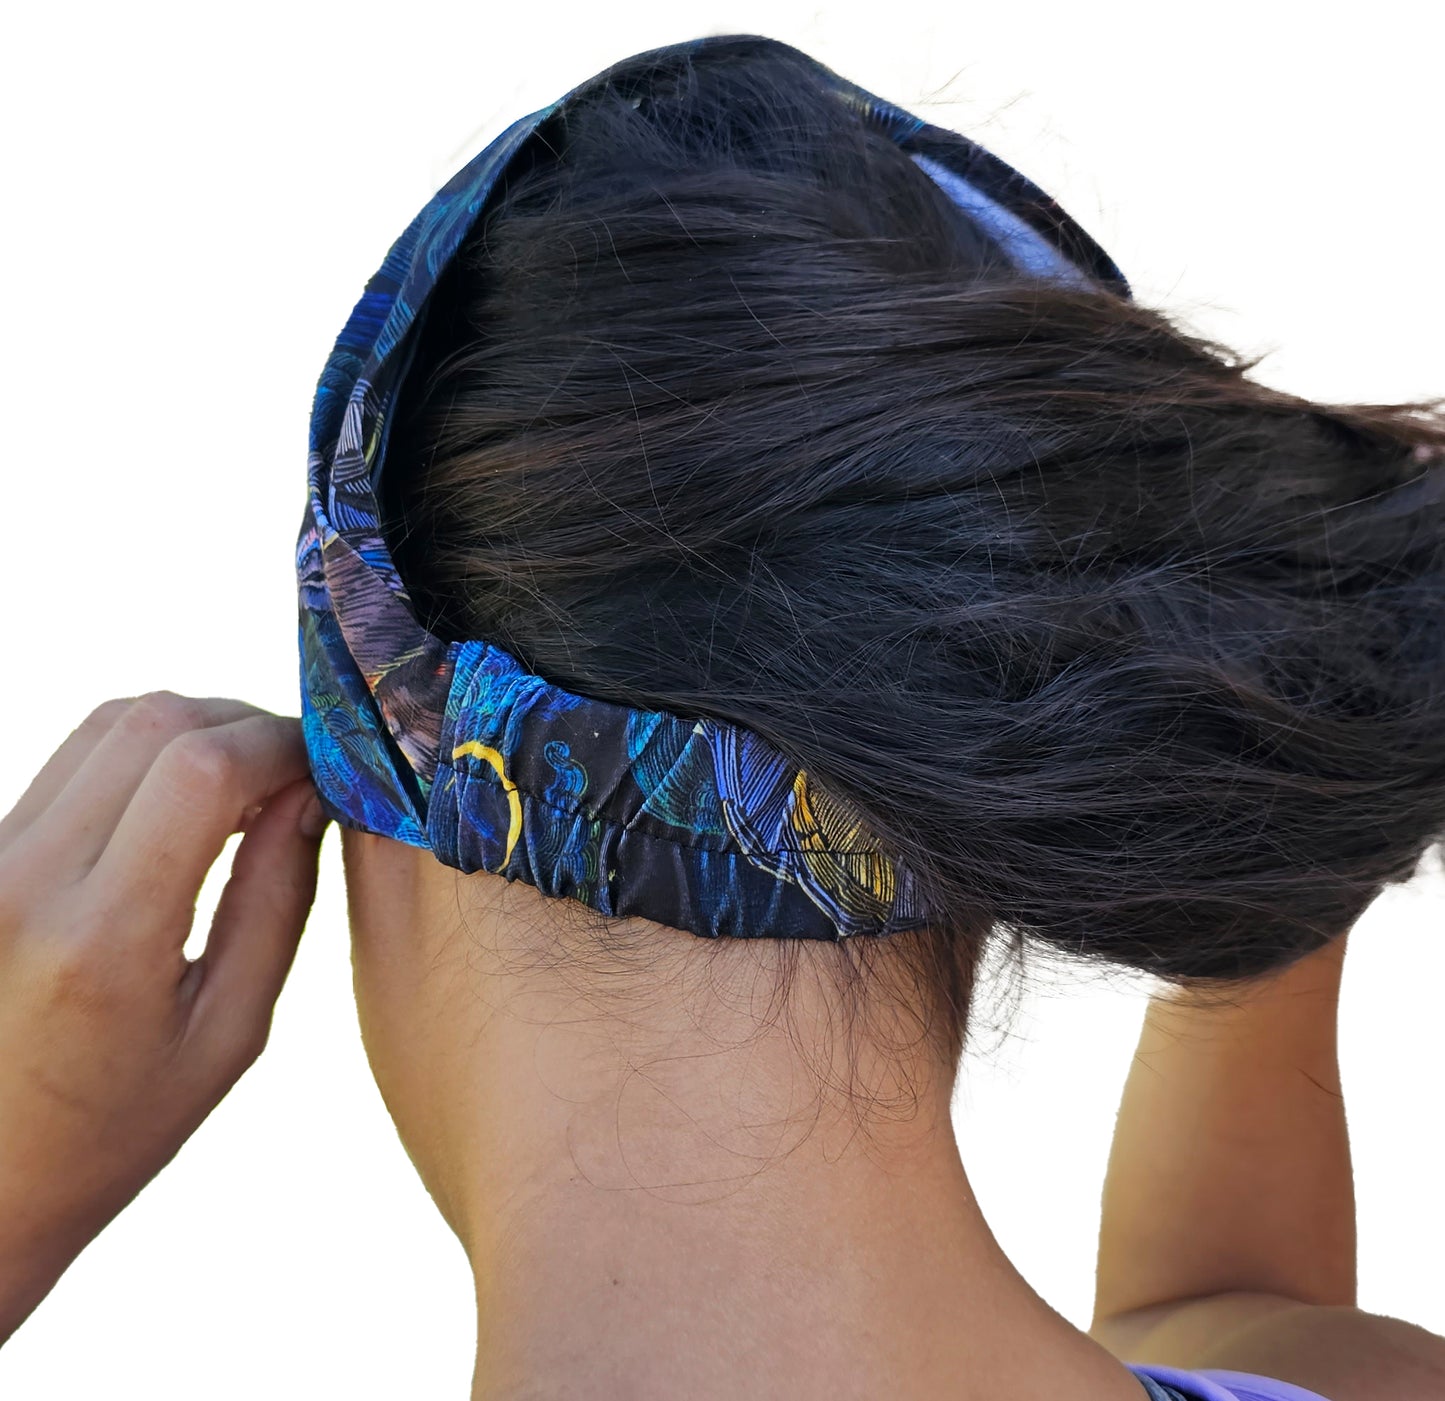 Tranquil Turtle Headband - Perfect Match for YOGAZ Pants